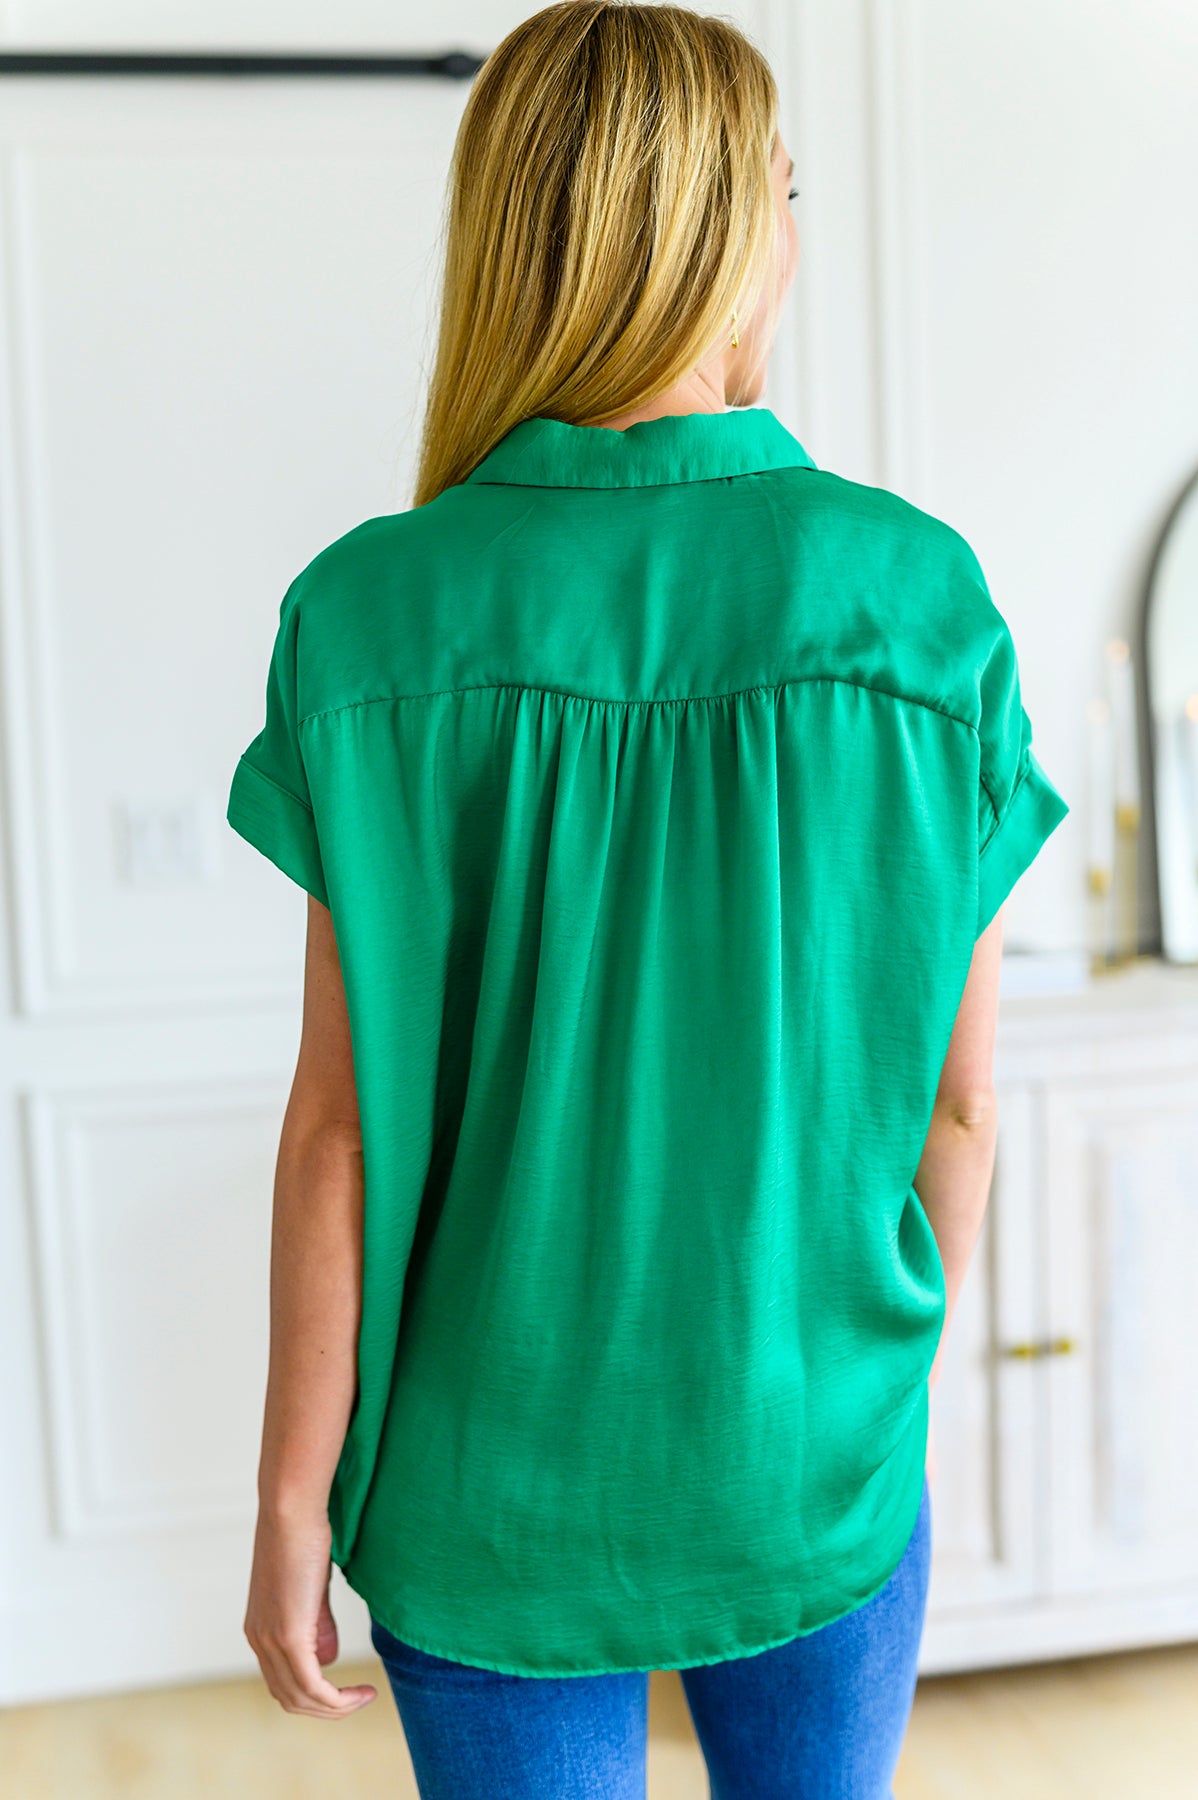 Working On Me Top in Kelly Green - 5/4/2023